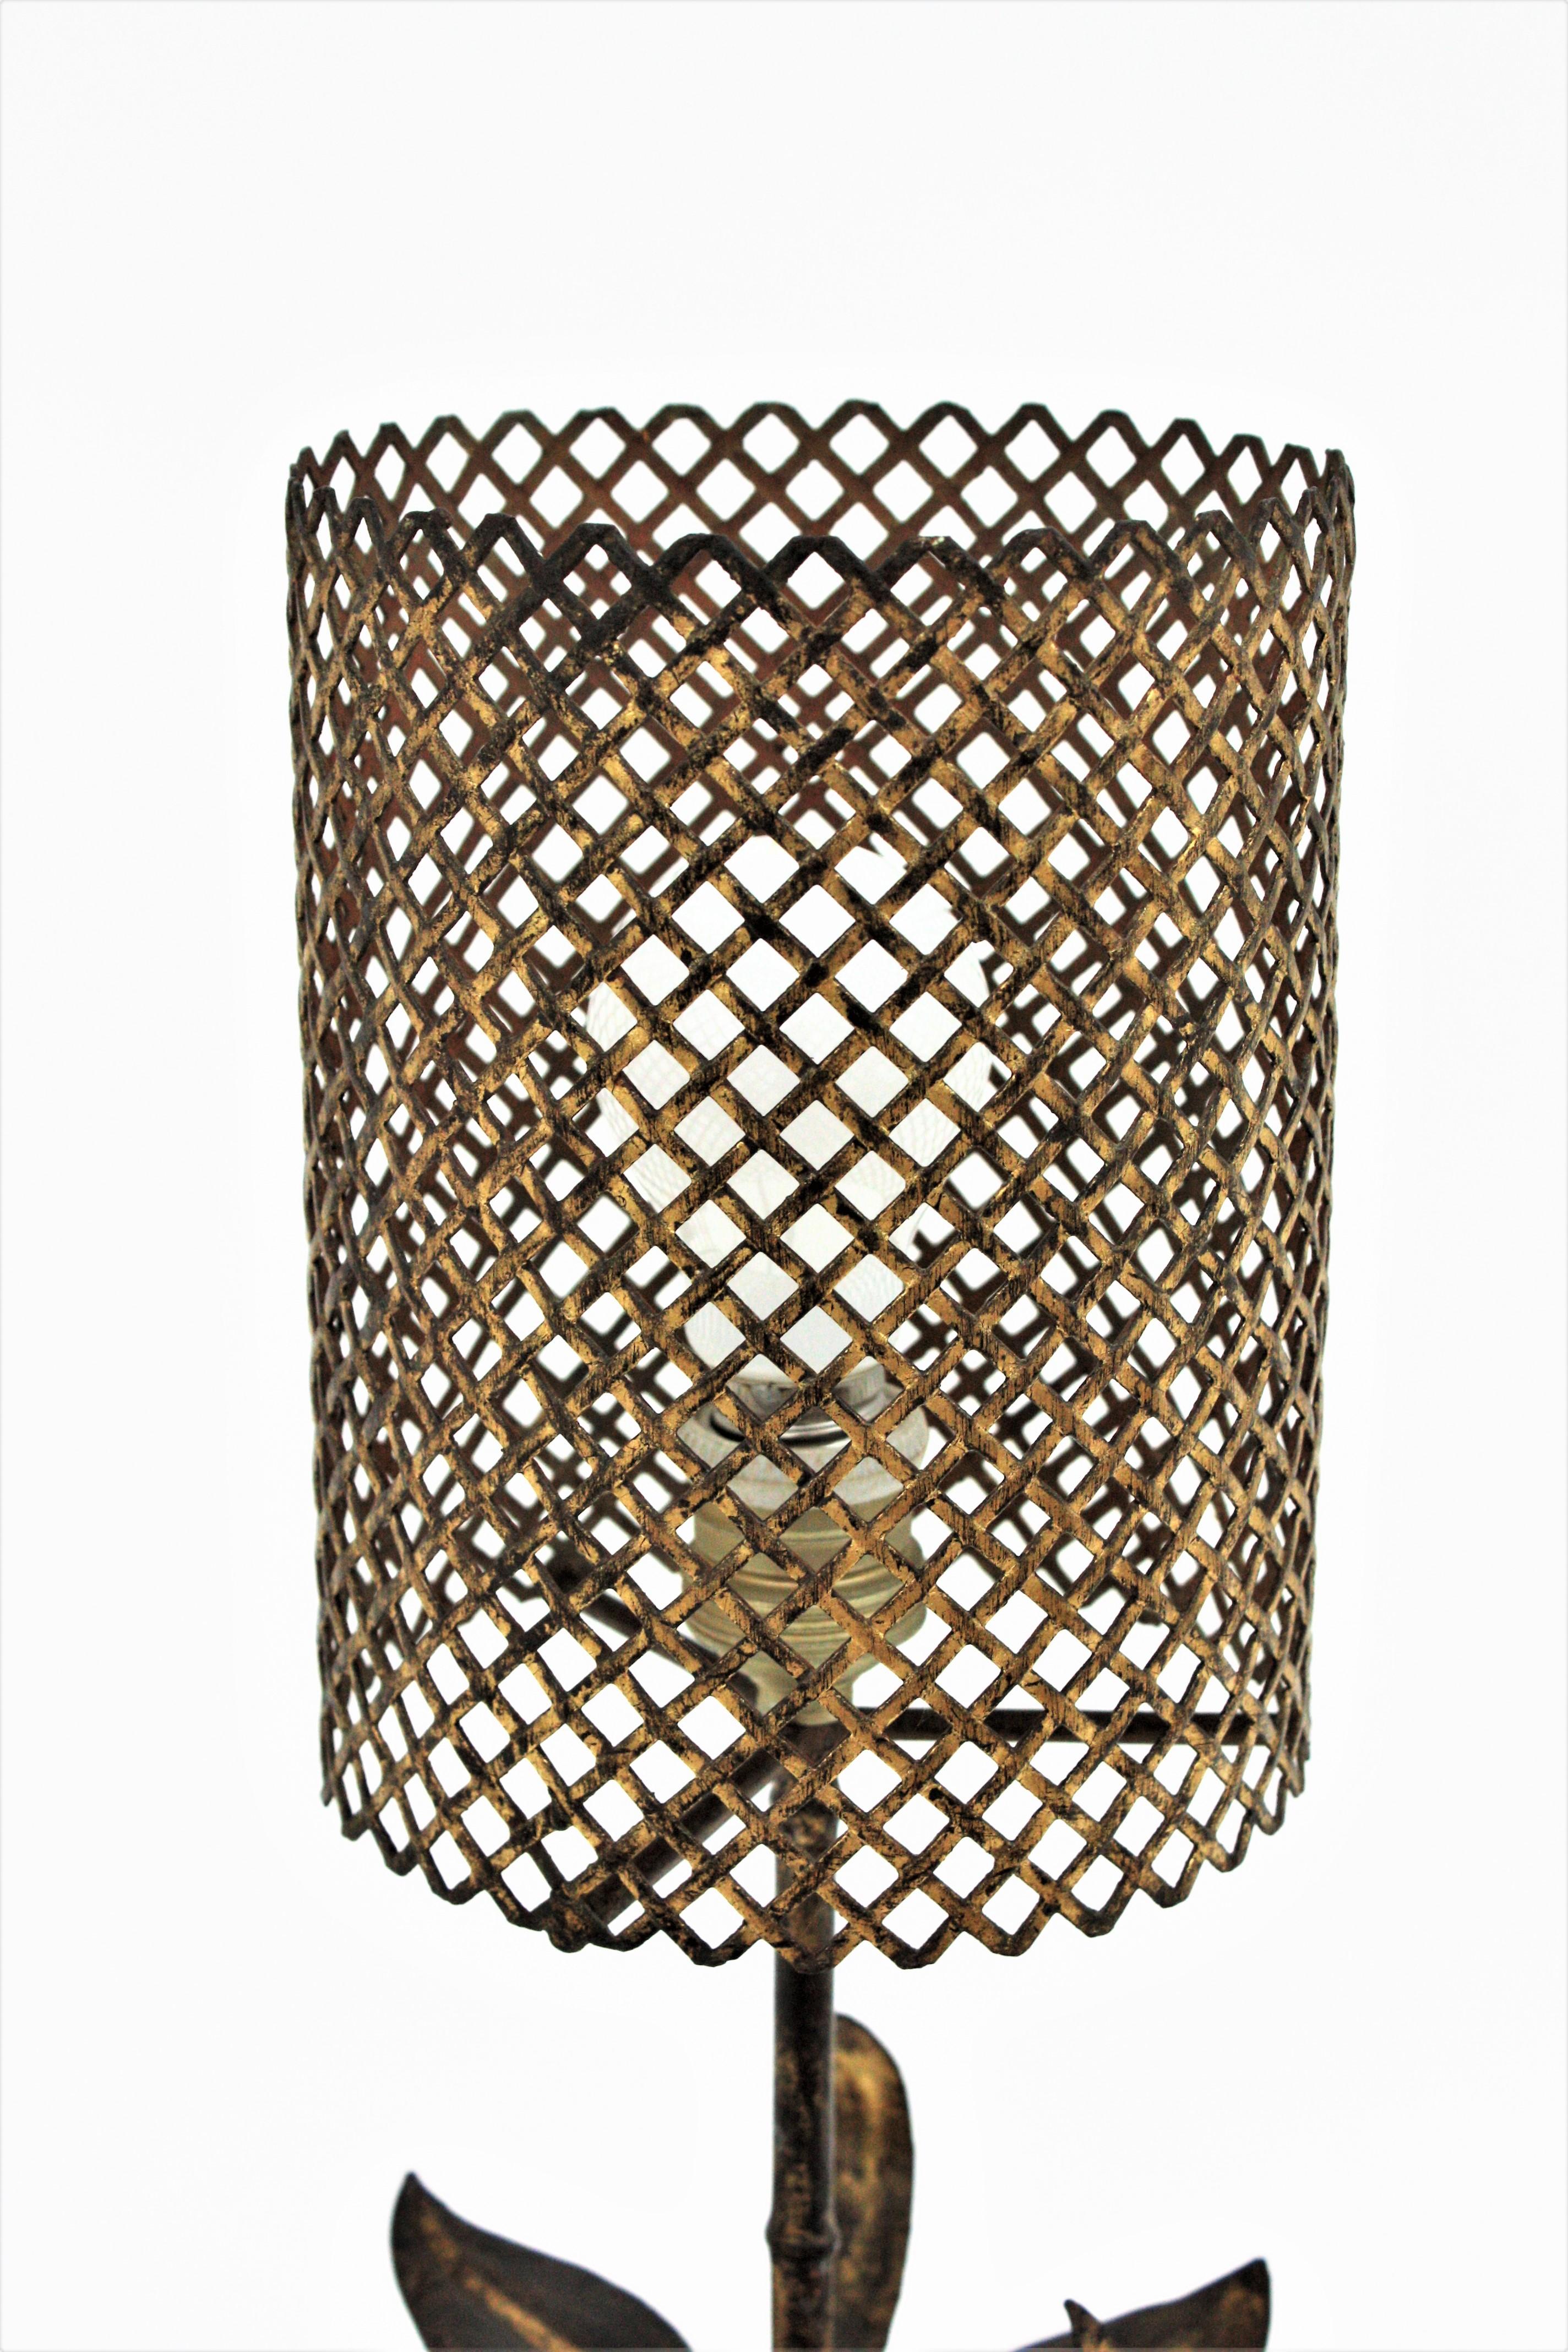 French Faux Bamboo Foliage Tripod Table Lamp in Gilt Metal, 1940s For Sale 4